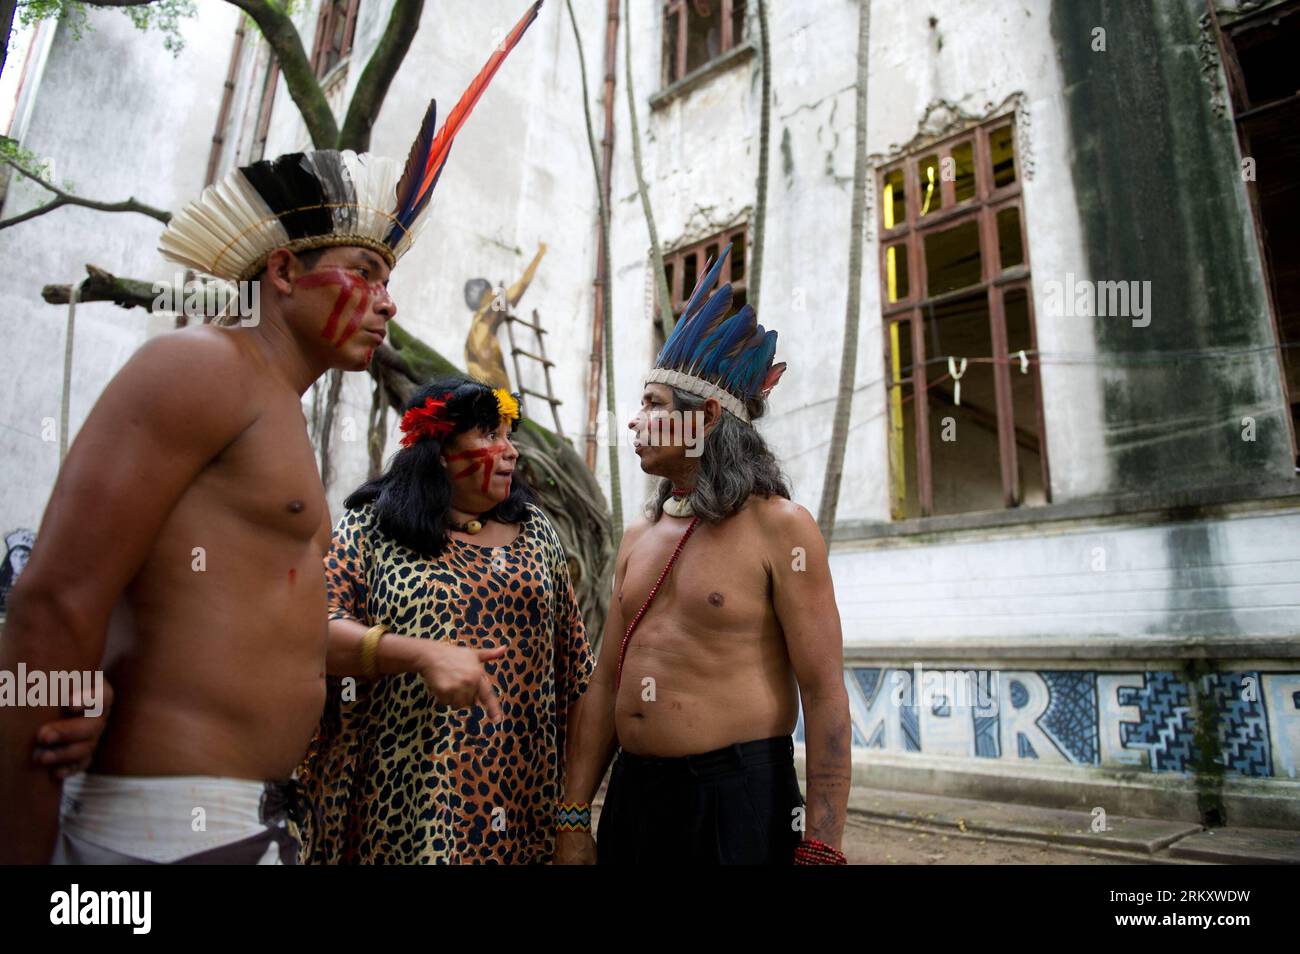 Bildnummer: 59095332  Datum: 16.01.2013  Copyright: imago/Xinhua (130117) -- RIO DE JANEIRO, Jan. 16, 2013 (Xinhua) -- Indigenous discuss the governmental proposal outside the old Indian Museum in Rio de Janeiro, Brazil, Jan. 16, 2013. The government of Rio de Janeiro plans to tear down an old Indian museum beside Maracana Stadium to build parking lot and shopping center here for the upcoming Brazil 2014 FIFA World Cup. The plan met with protest from the indigenous groups. Now Indians from 17 tribes around Brazil settle down in the old building, appealing for the protection of the century-old Stock Photo